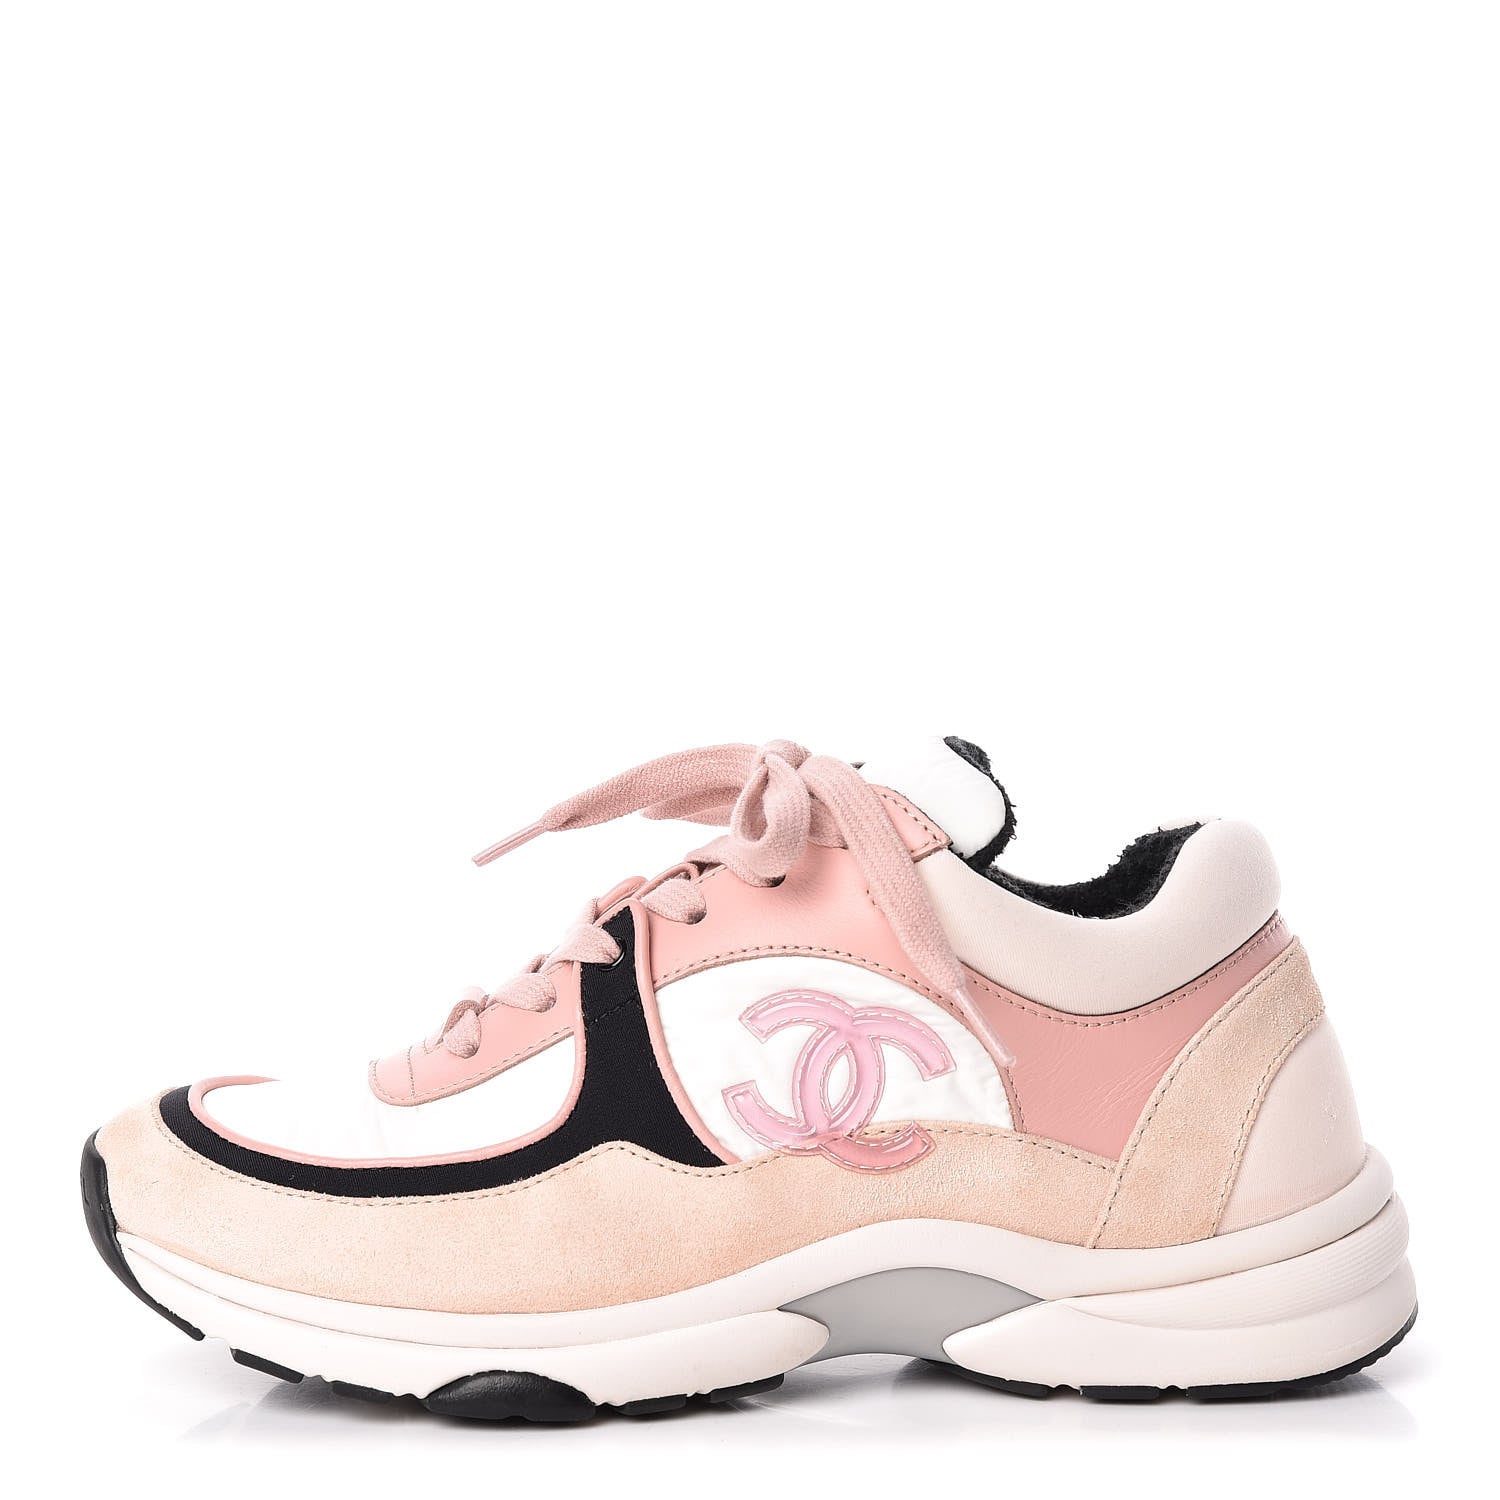 chanel pink tennis shoes